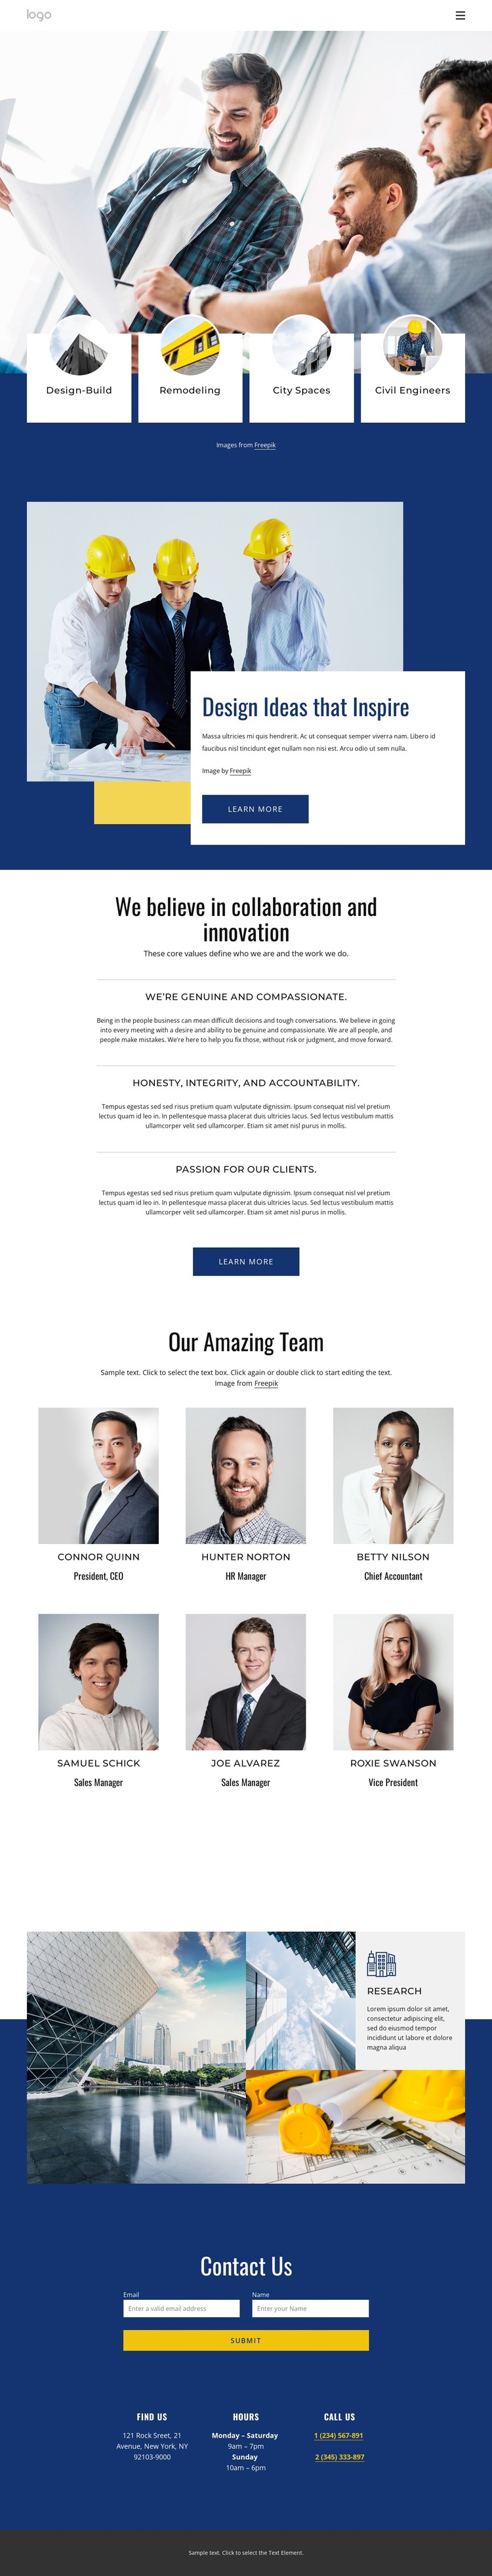 We have over 125 architecture awards HTML5 Template